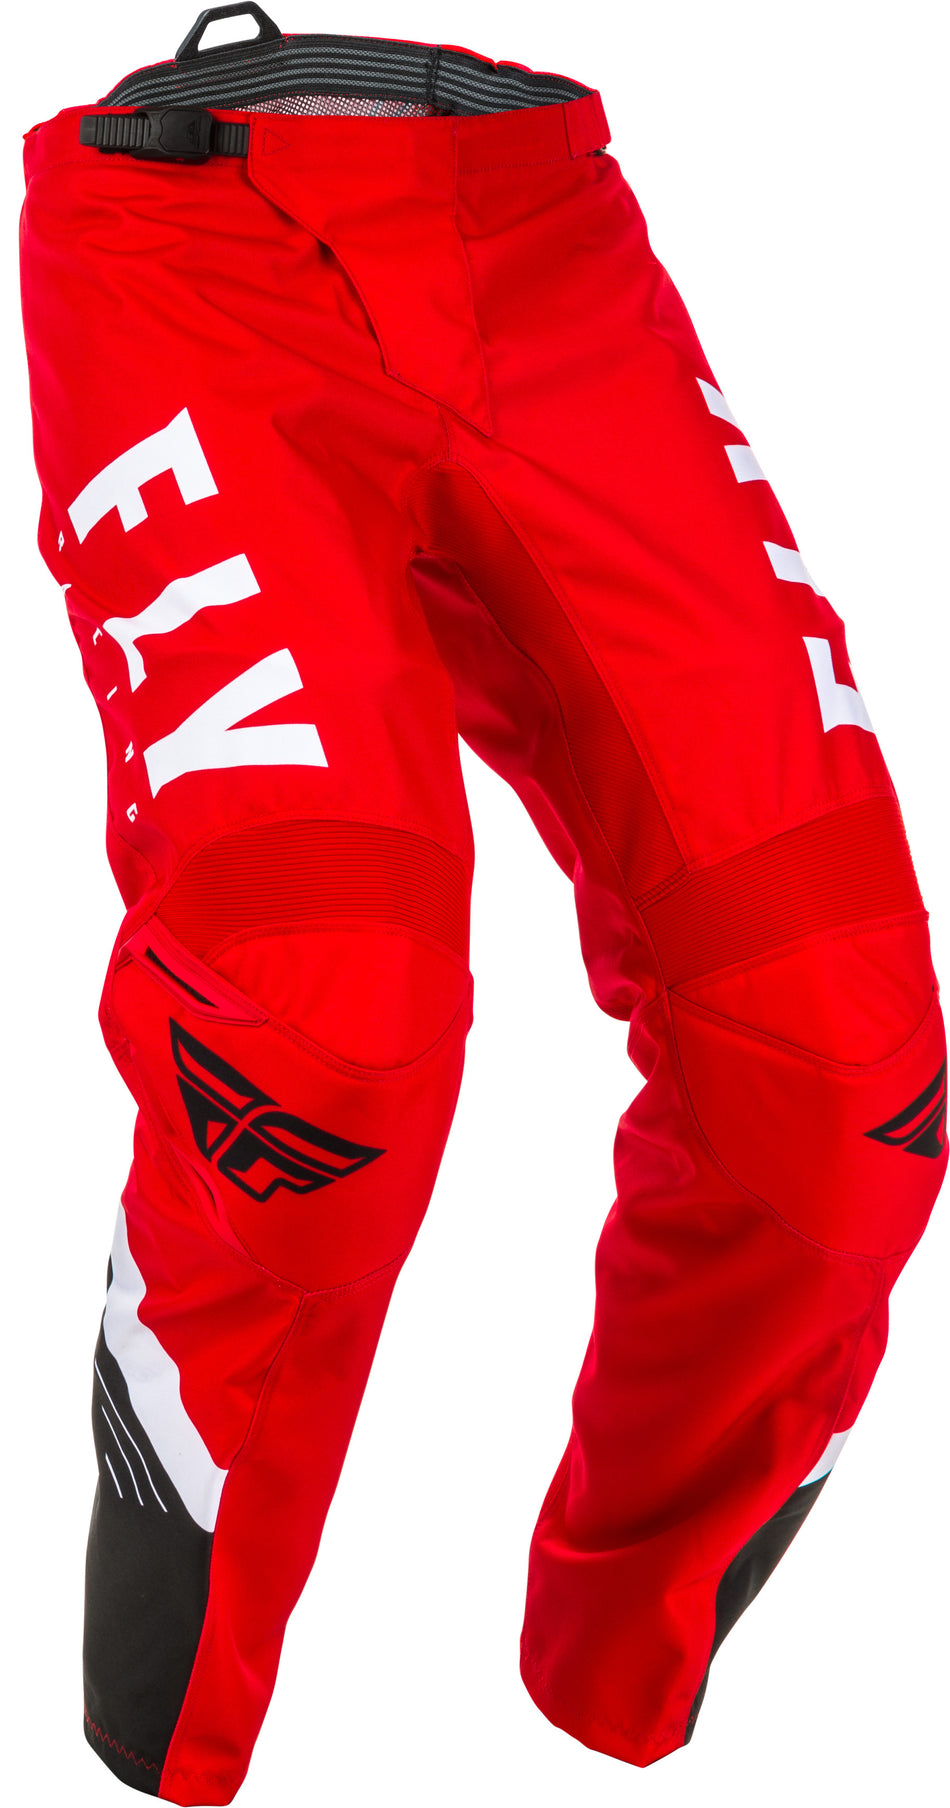 FLY RACING F-16 Pants Red/Black/White Sz 34 373-93334